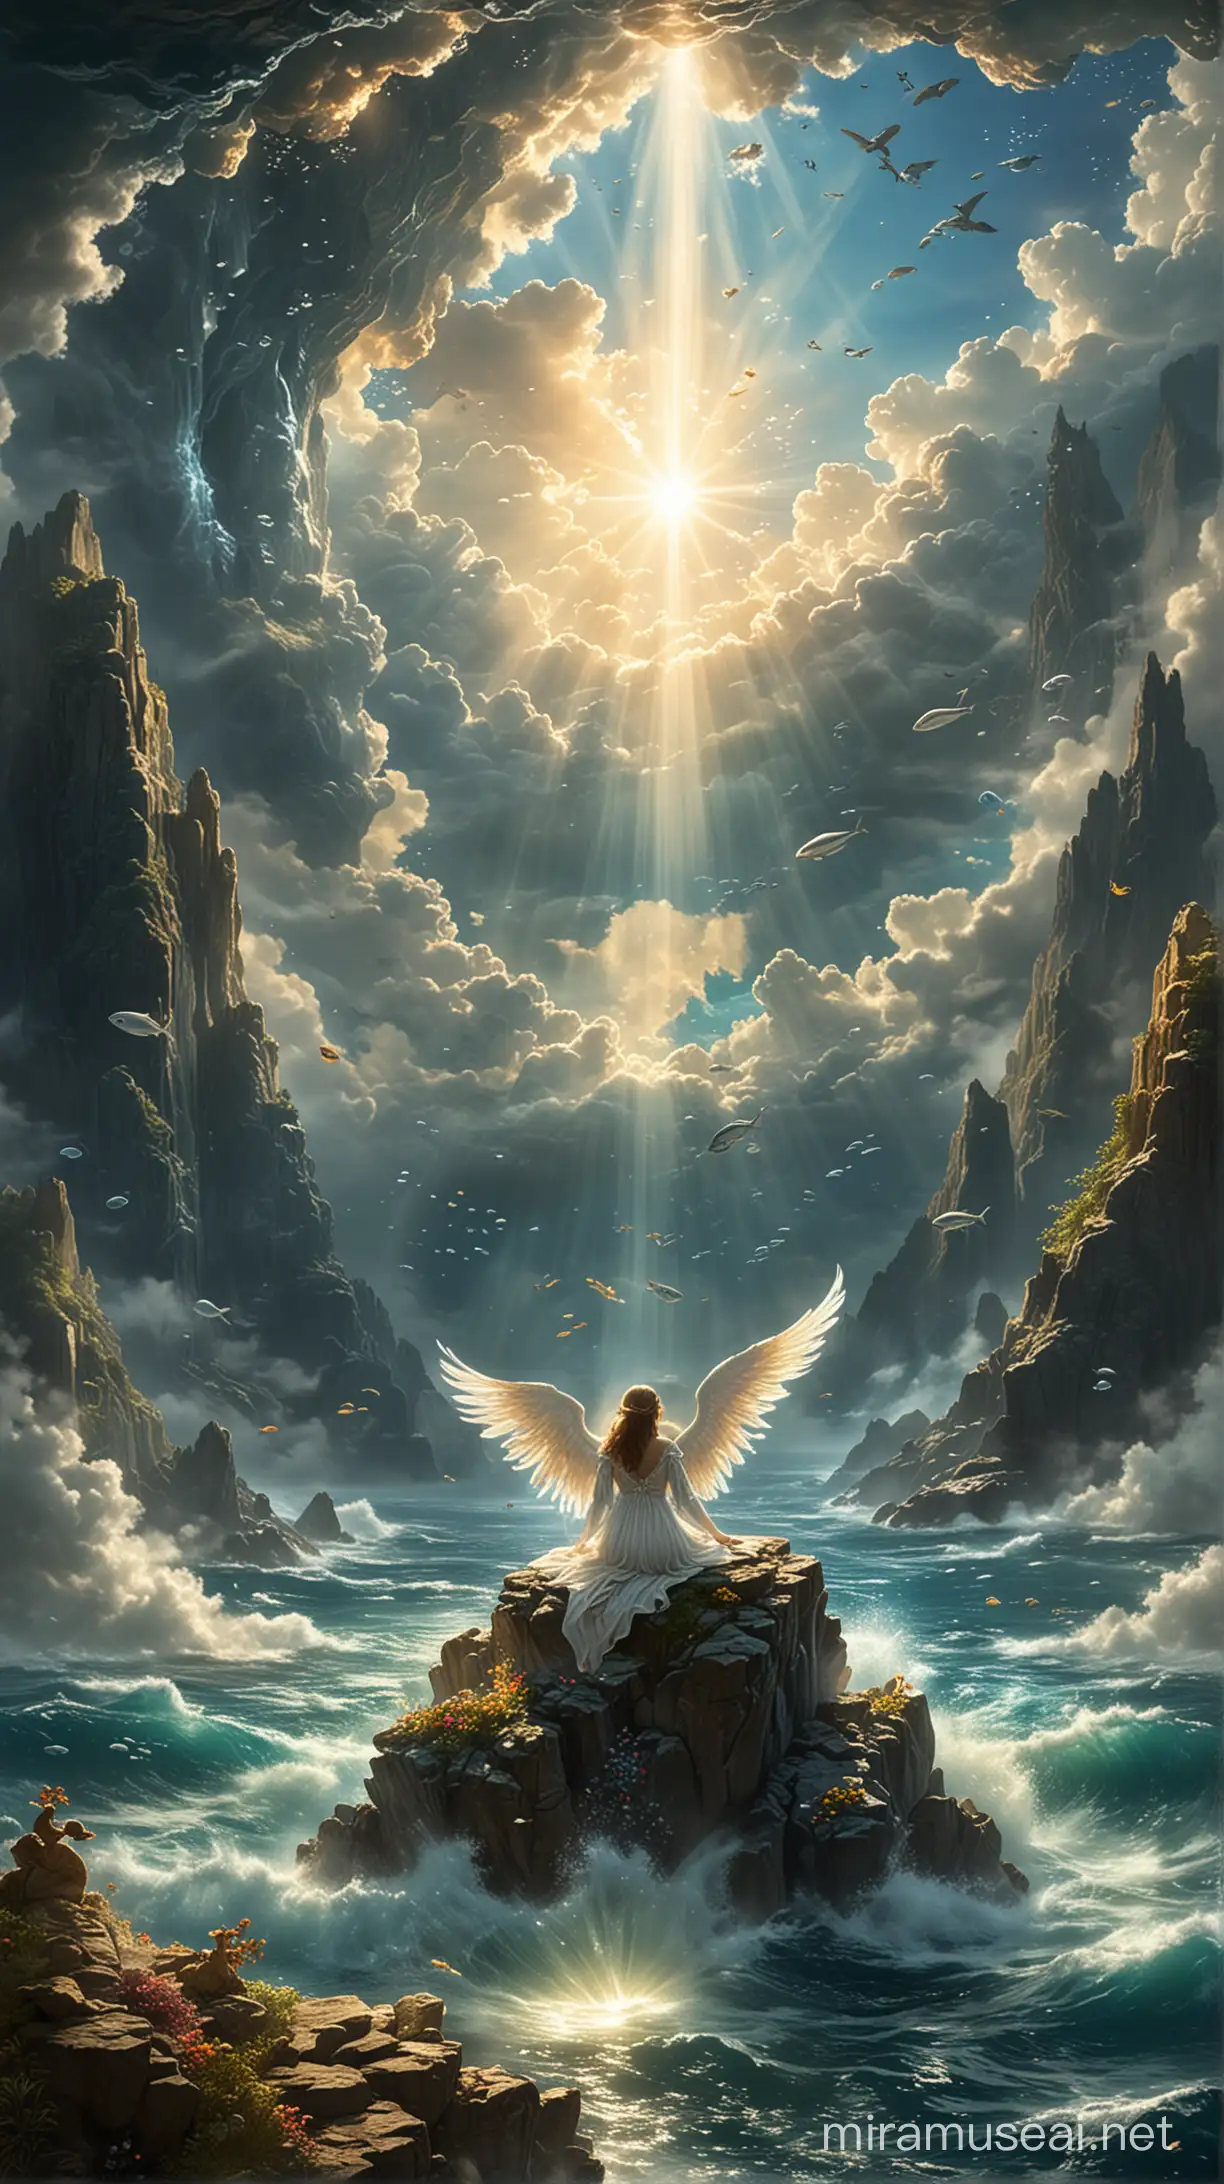 The angel of love is sitting on a mountain top, looking down at the undersea world, with sunlight shining through the clouds.